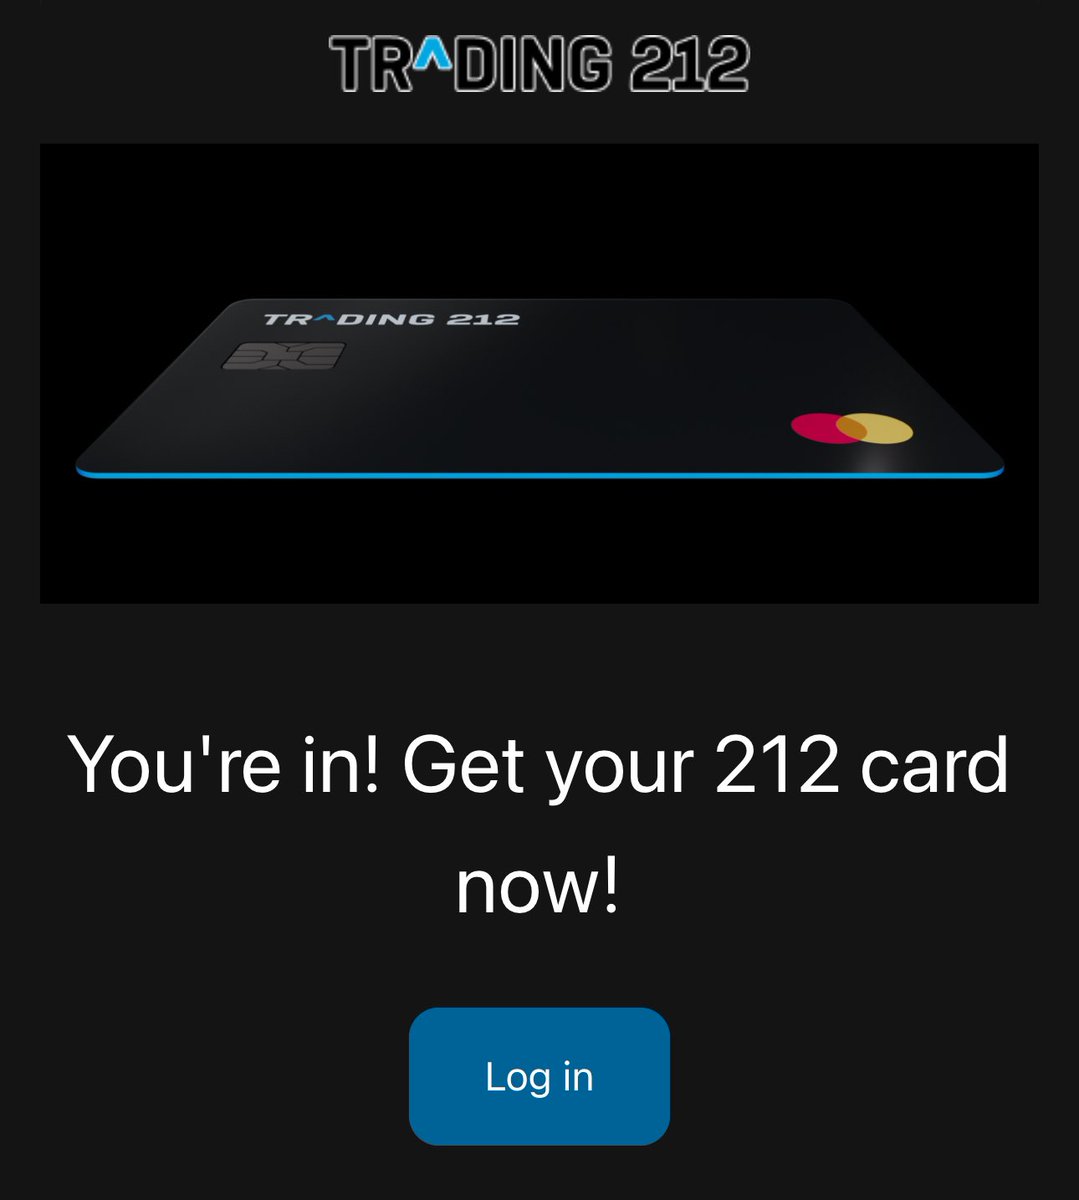 Just receive my Trading212 card!

Anyone else got theirs yet?

Also does anyone know when you’ll be able to use it on Apple Pay?